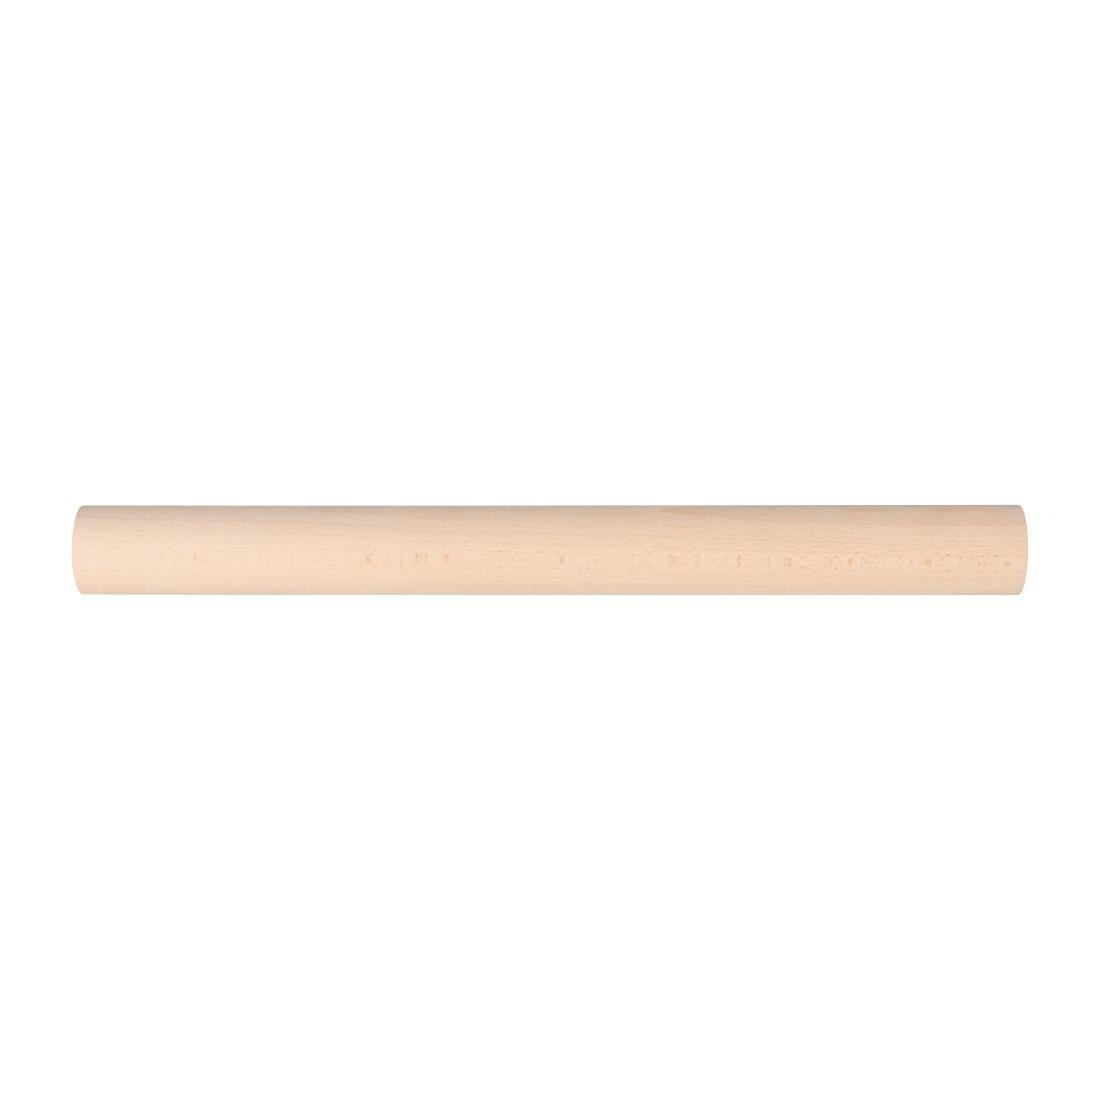 Vogue Wooden Rolling Pin 18" - J102  - 2